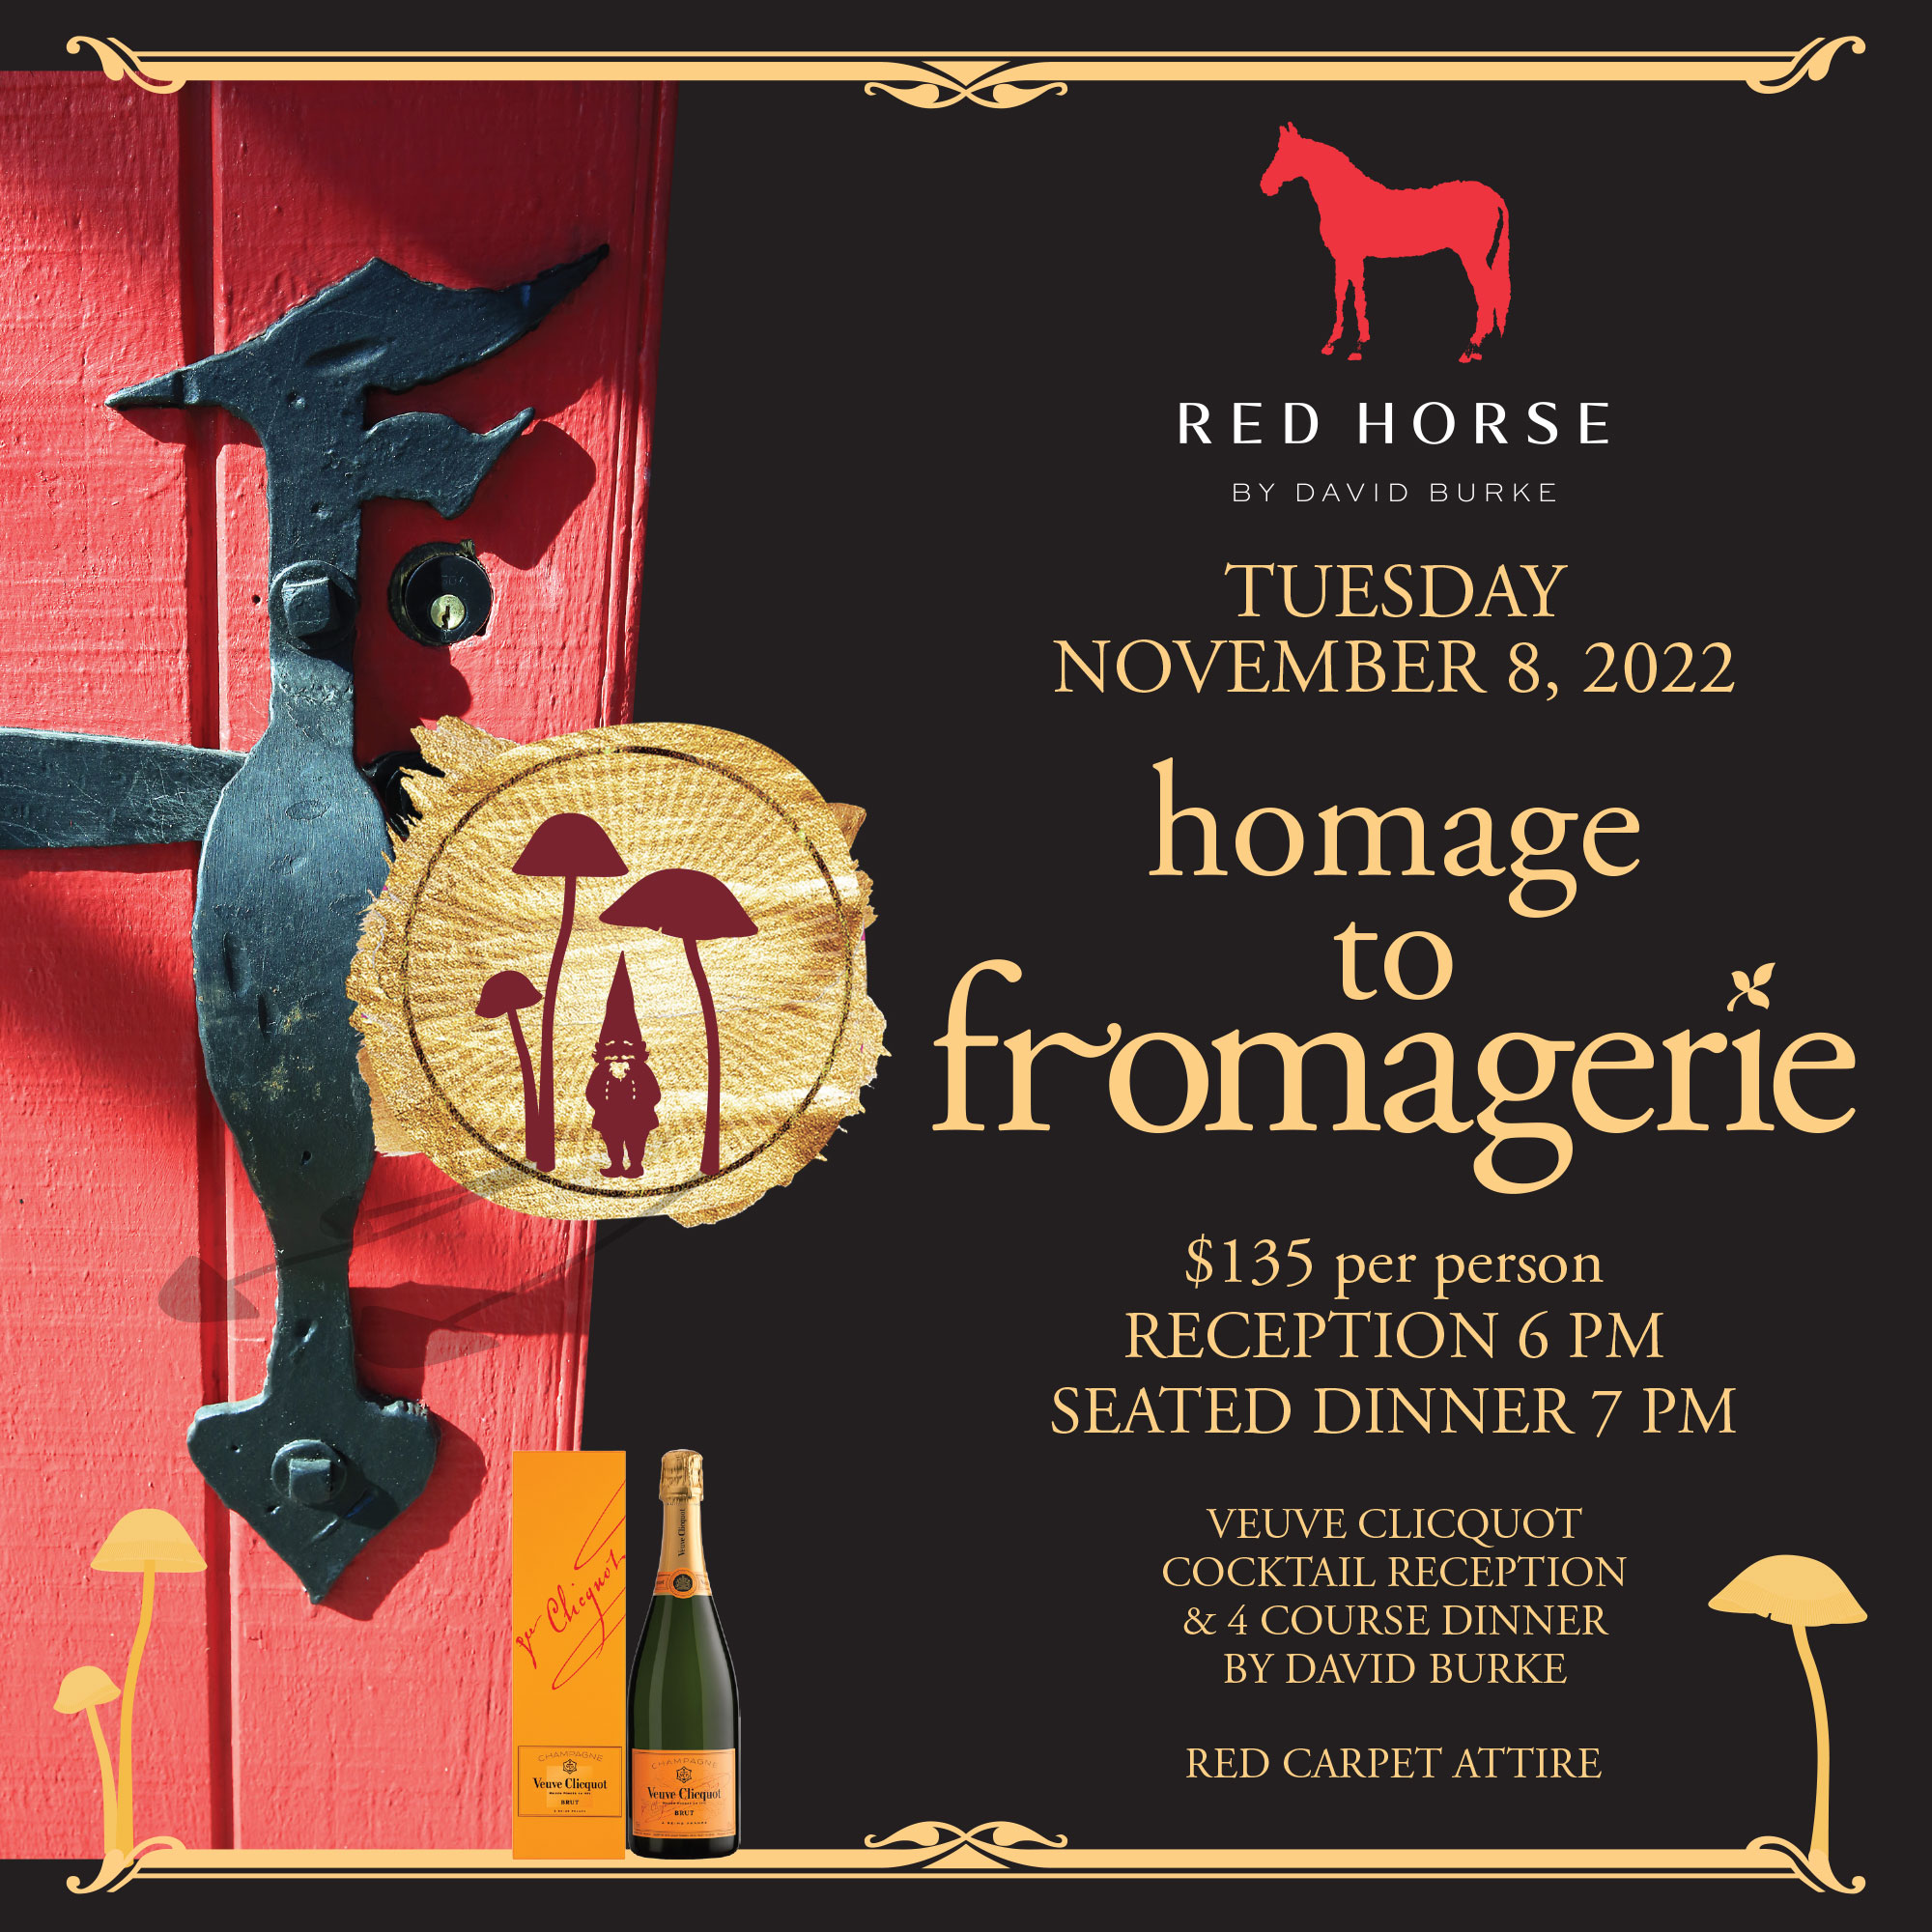 Red Horse Homage to Fromagerie